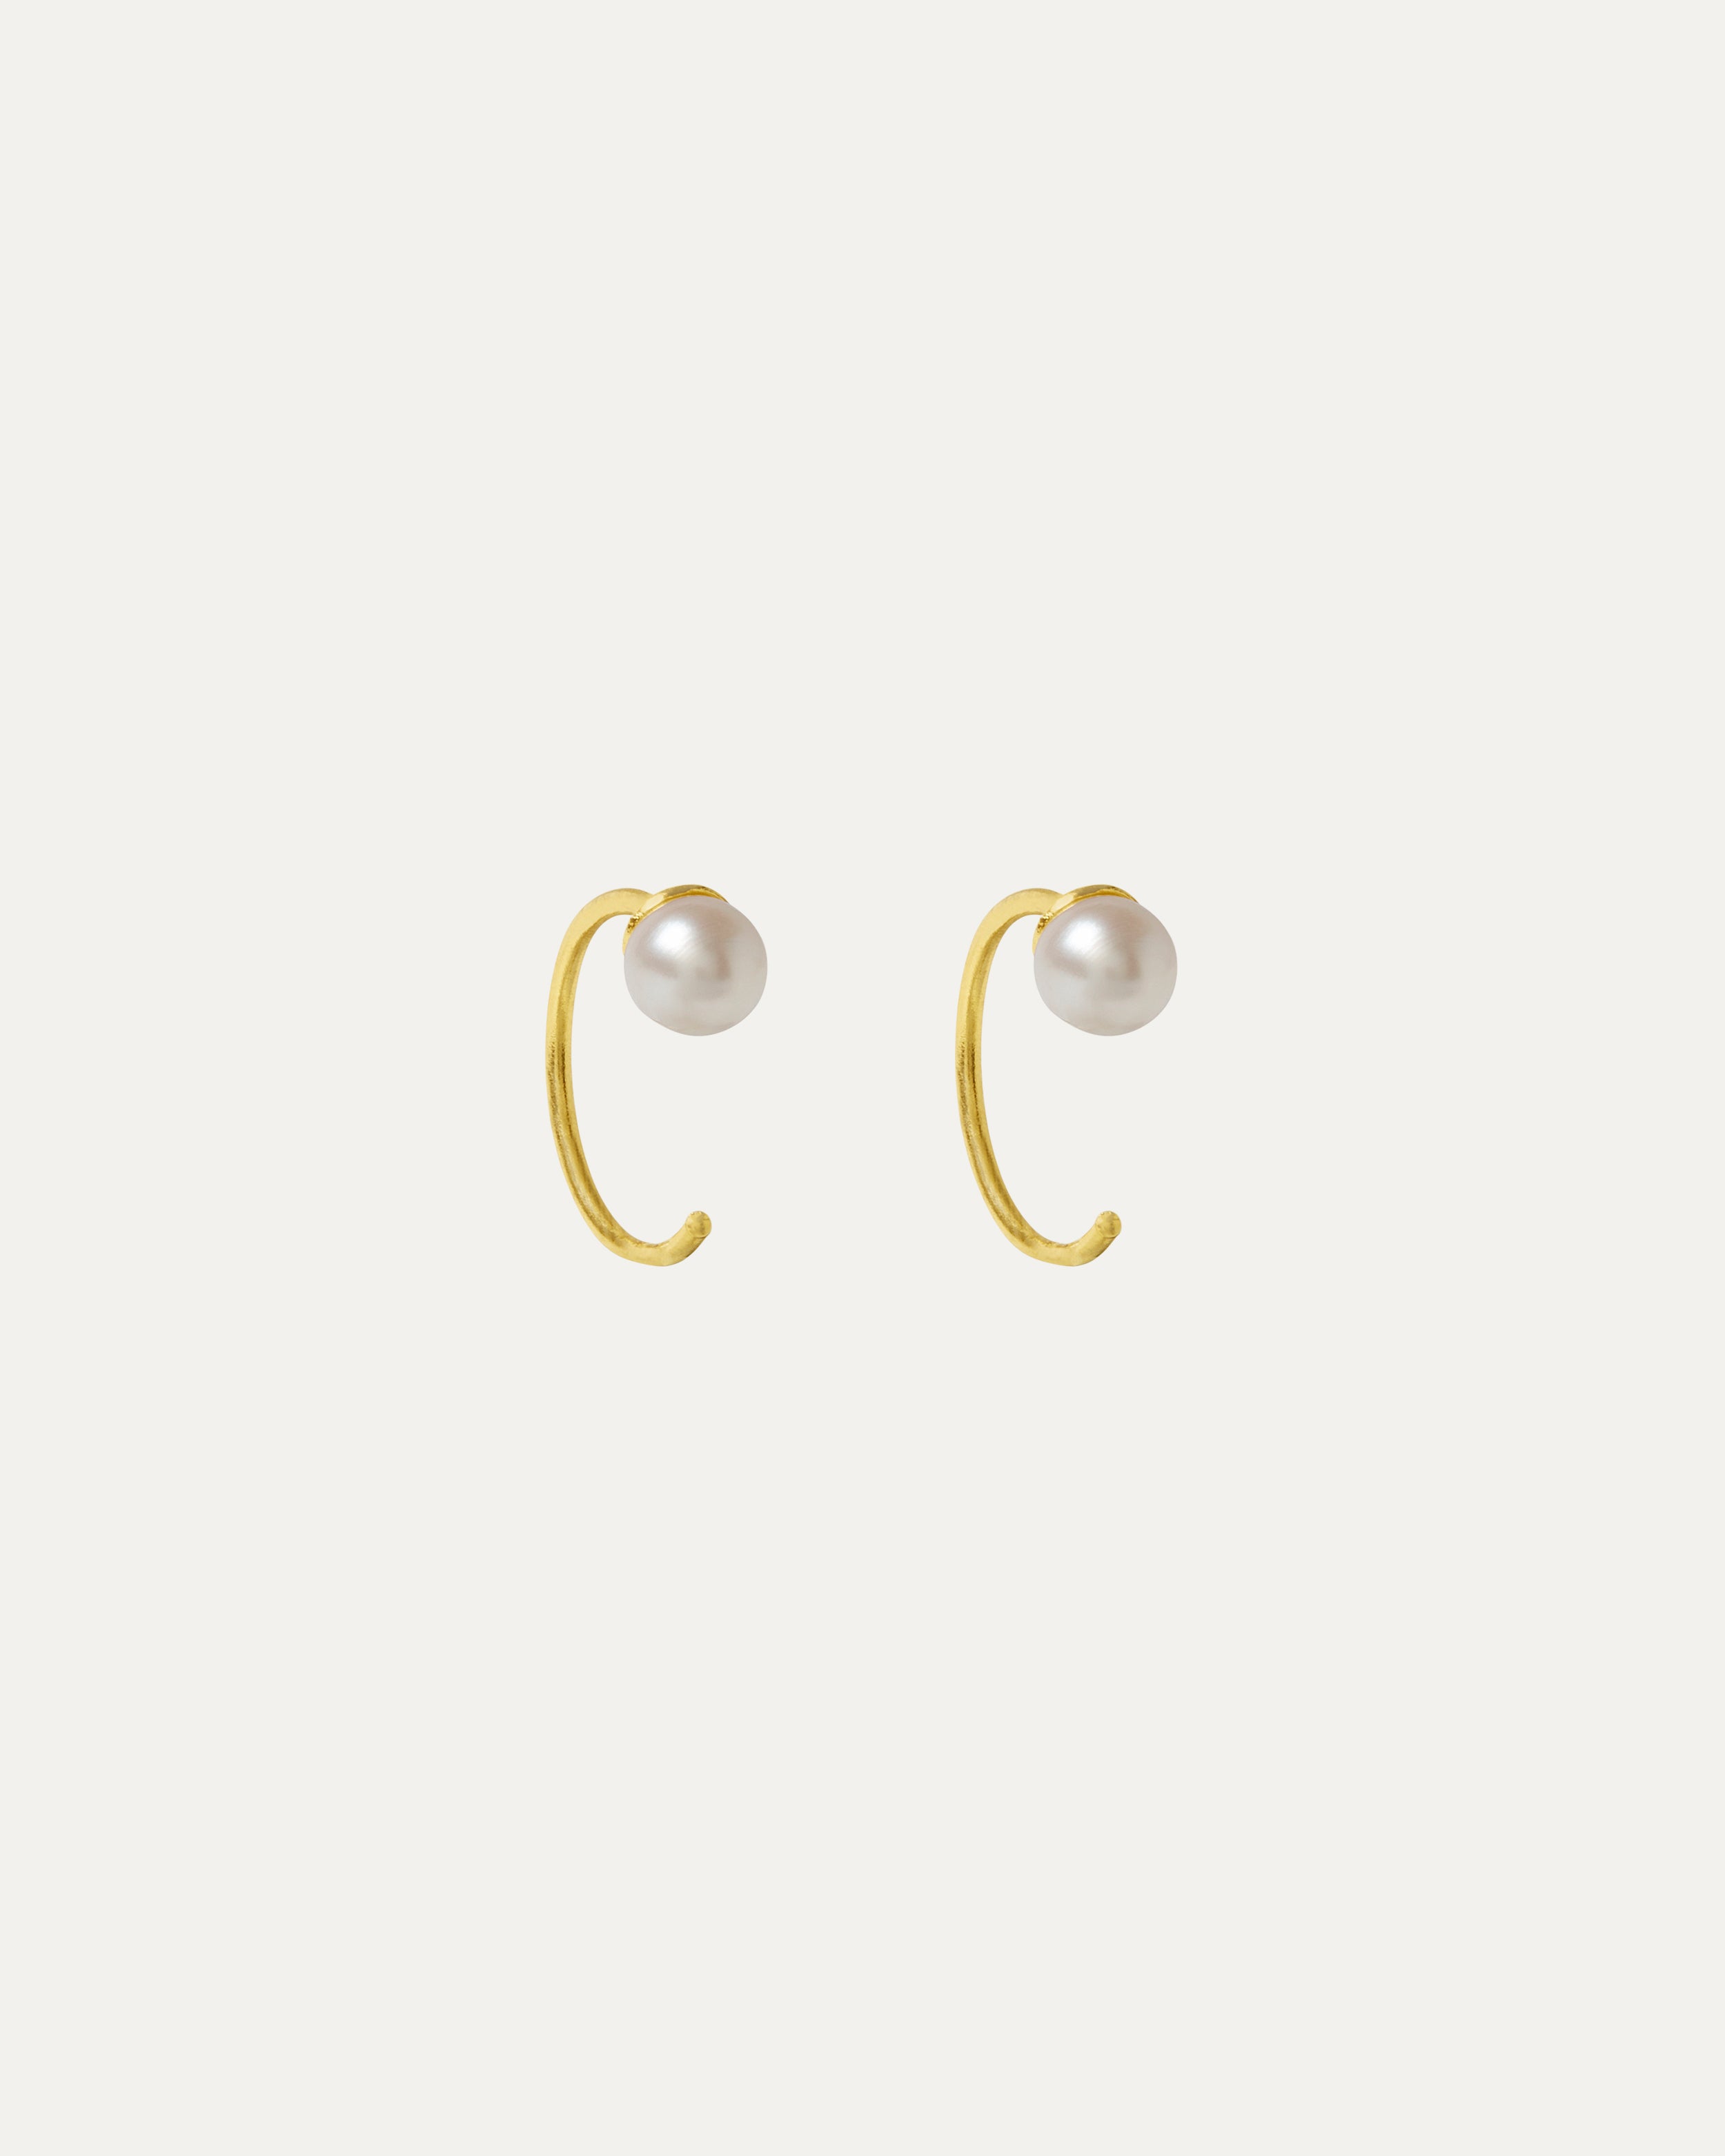 Nora Pearl Pull Through Earrings | Sustainable Jewellery by Ottoman Hands